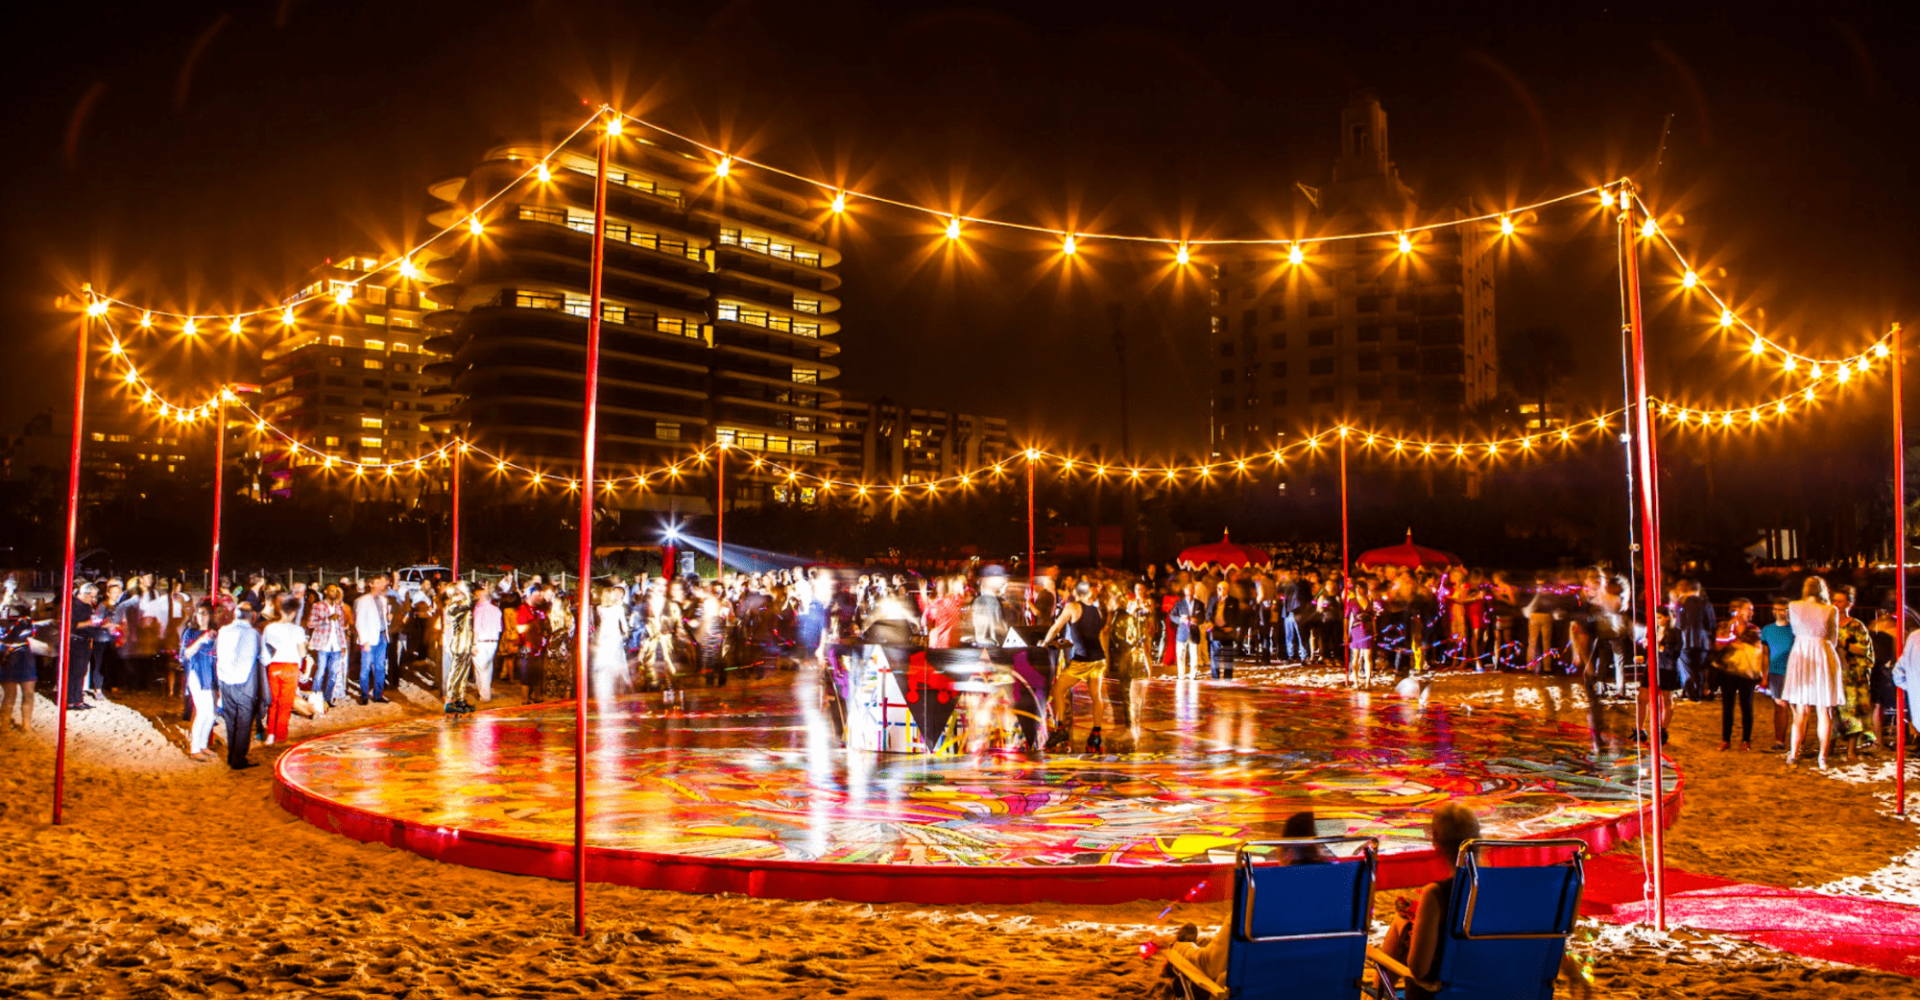 An elevated platform covered in murals on the beach with lights and people rollerskating